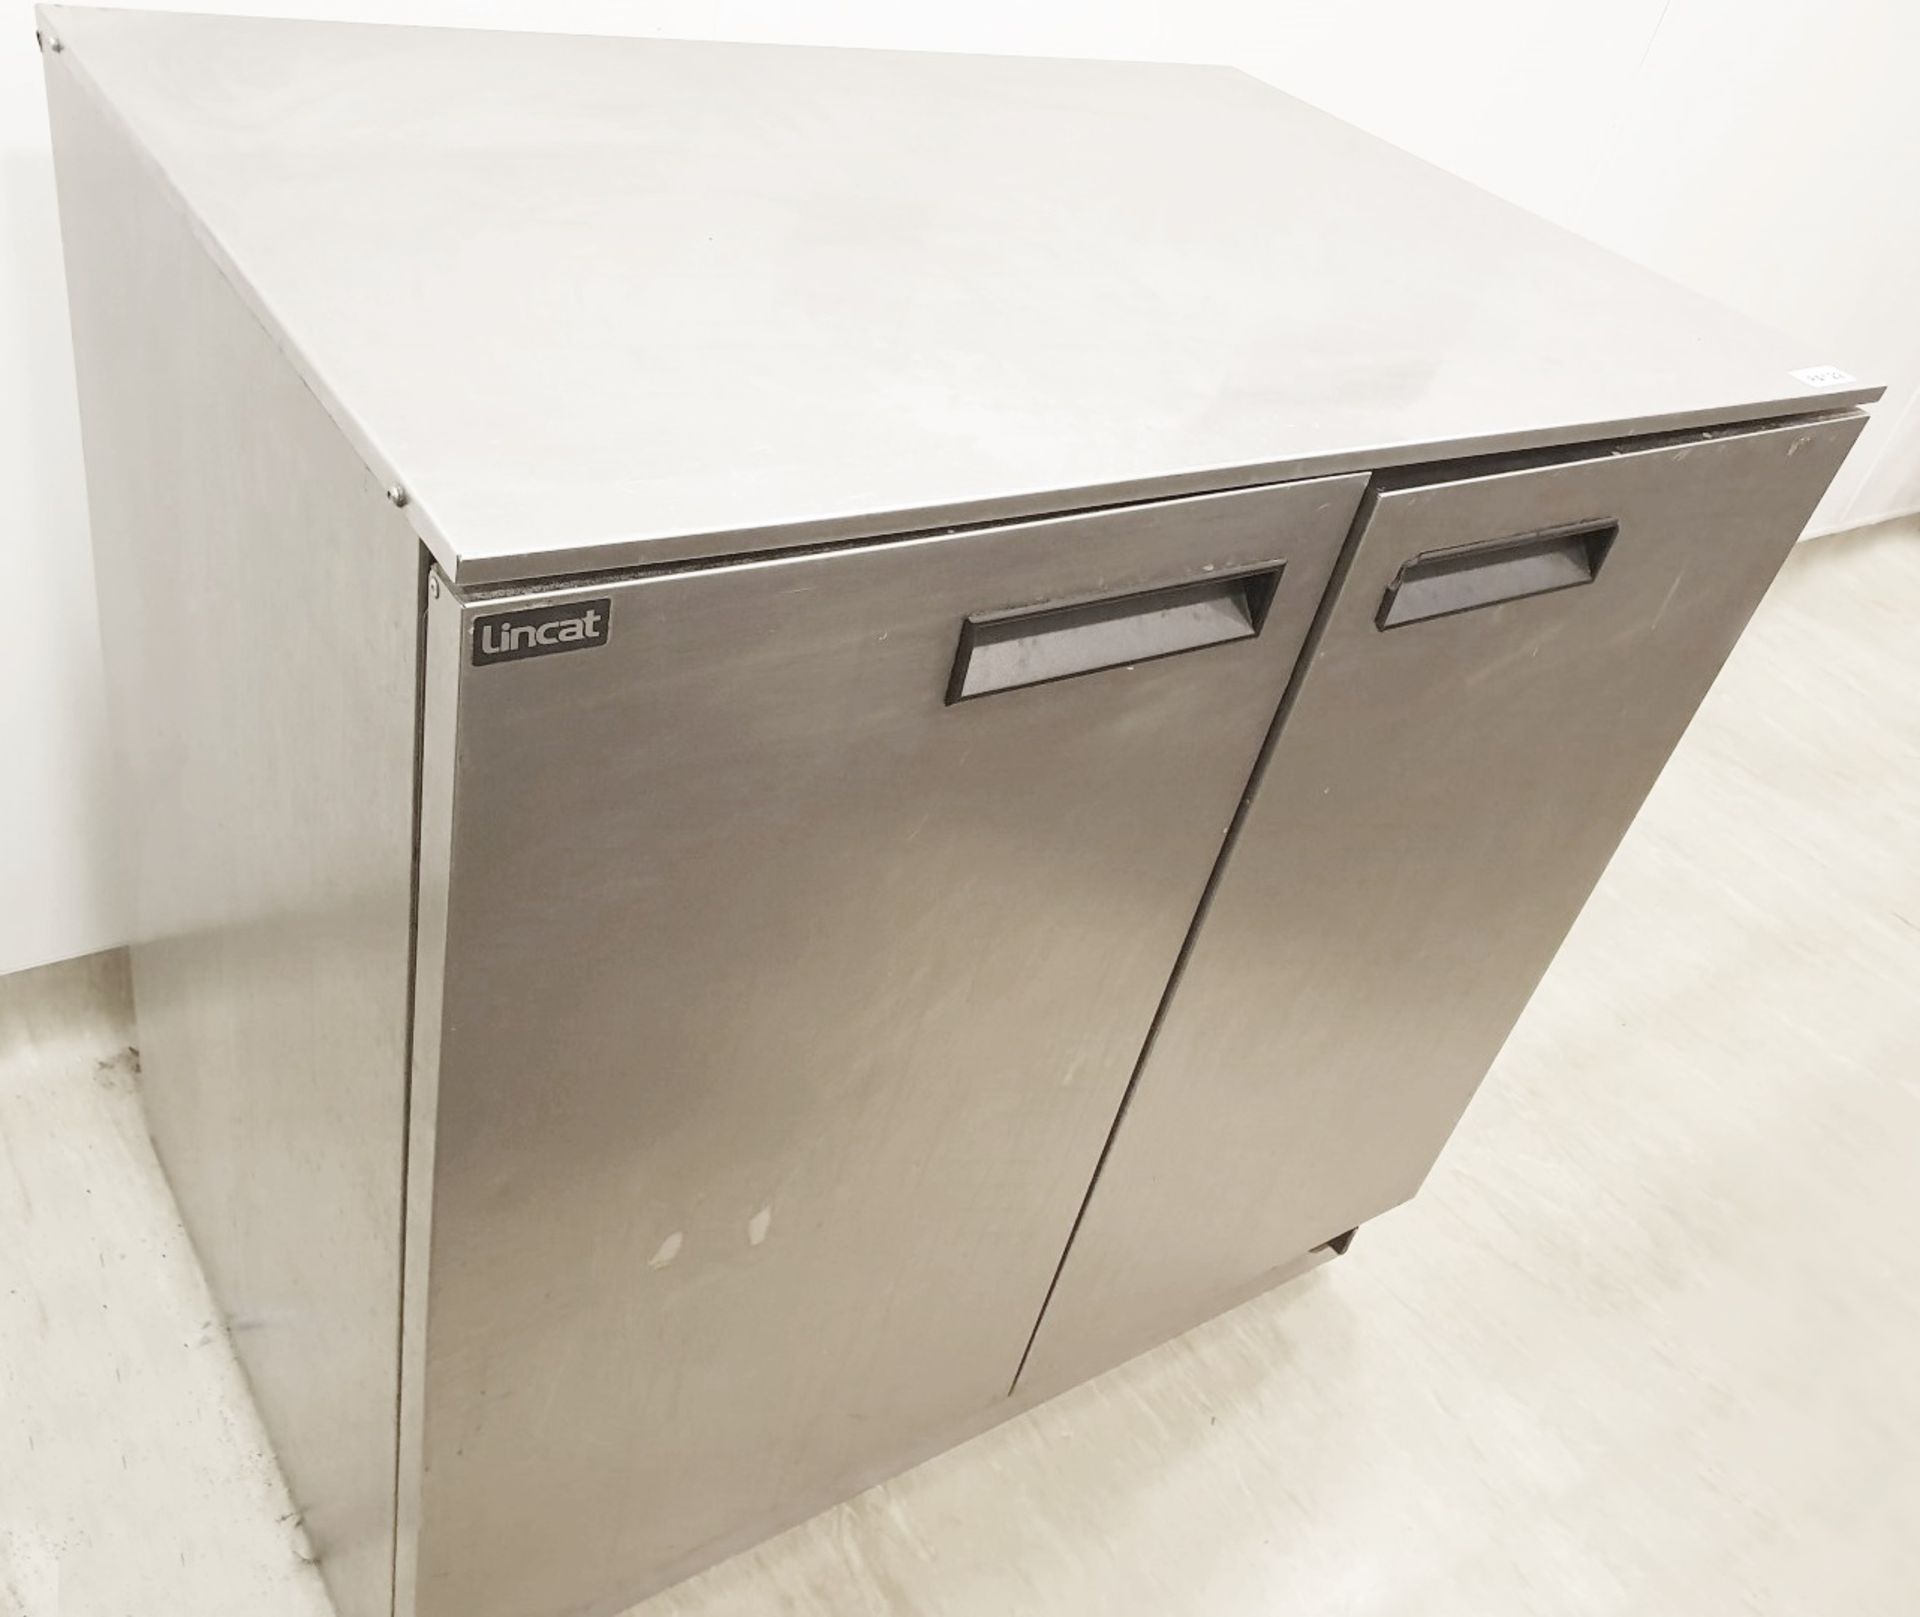 1 x Lincat Plate Warming Cupboard With Stainless Steel Exterior - H90 x W90 x D60 cms - Ref